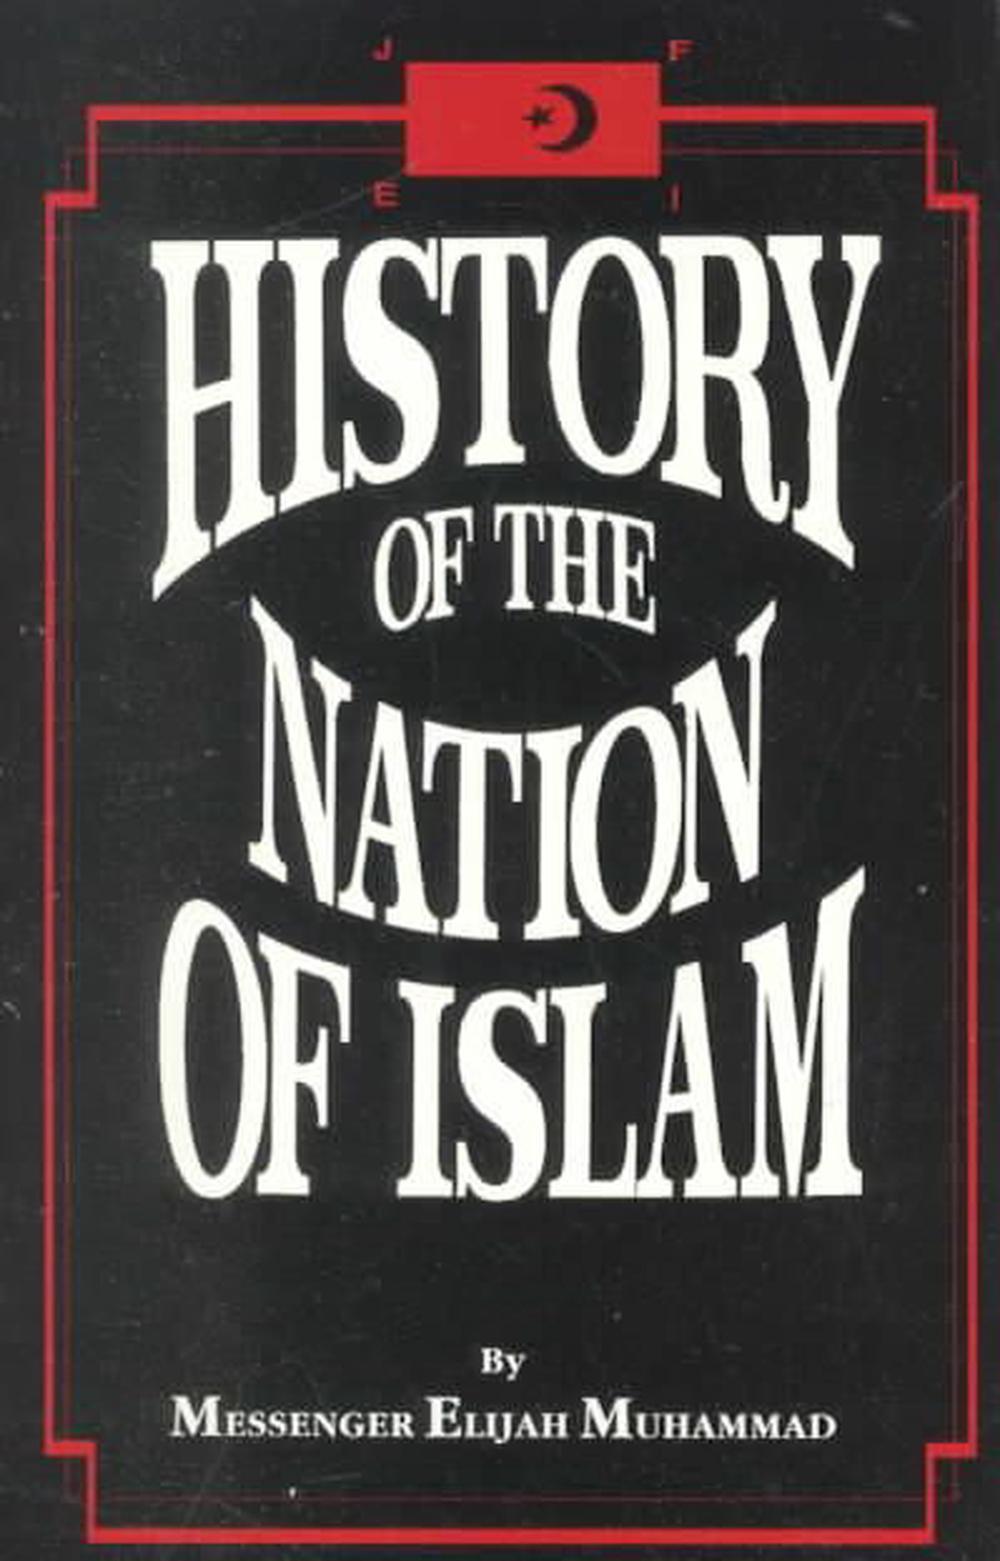 "History Of the Nation of Islam" by Elijah Muhammad